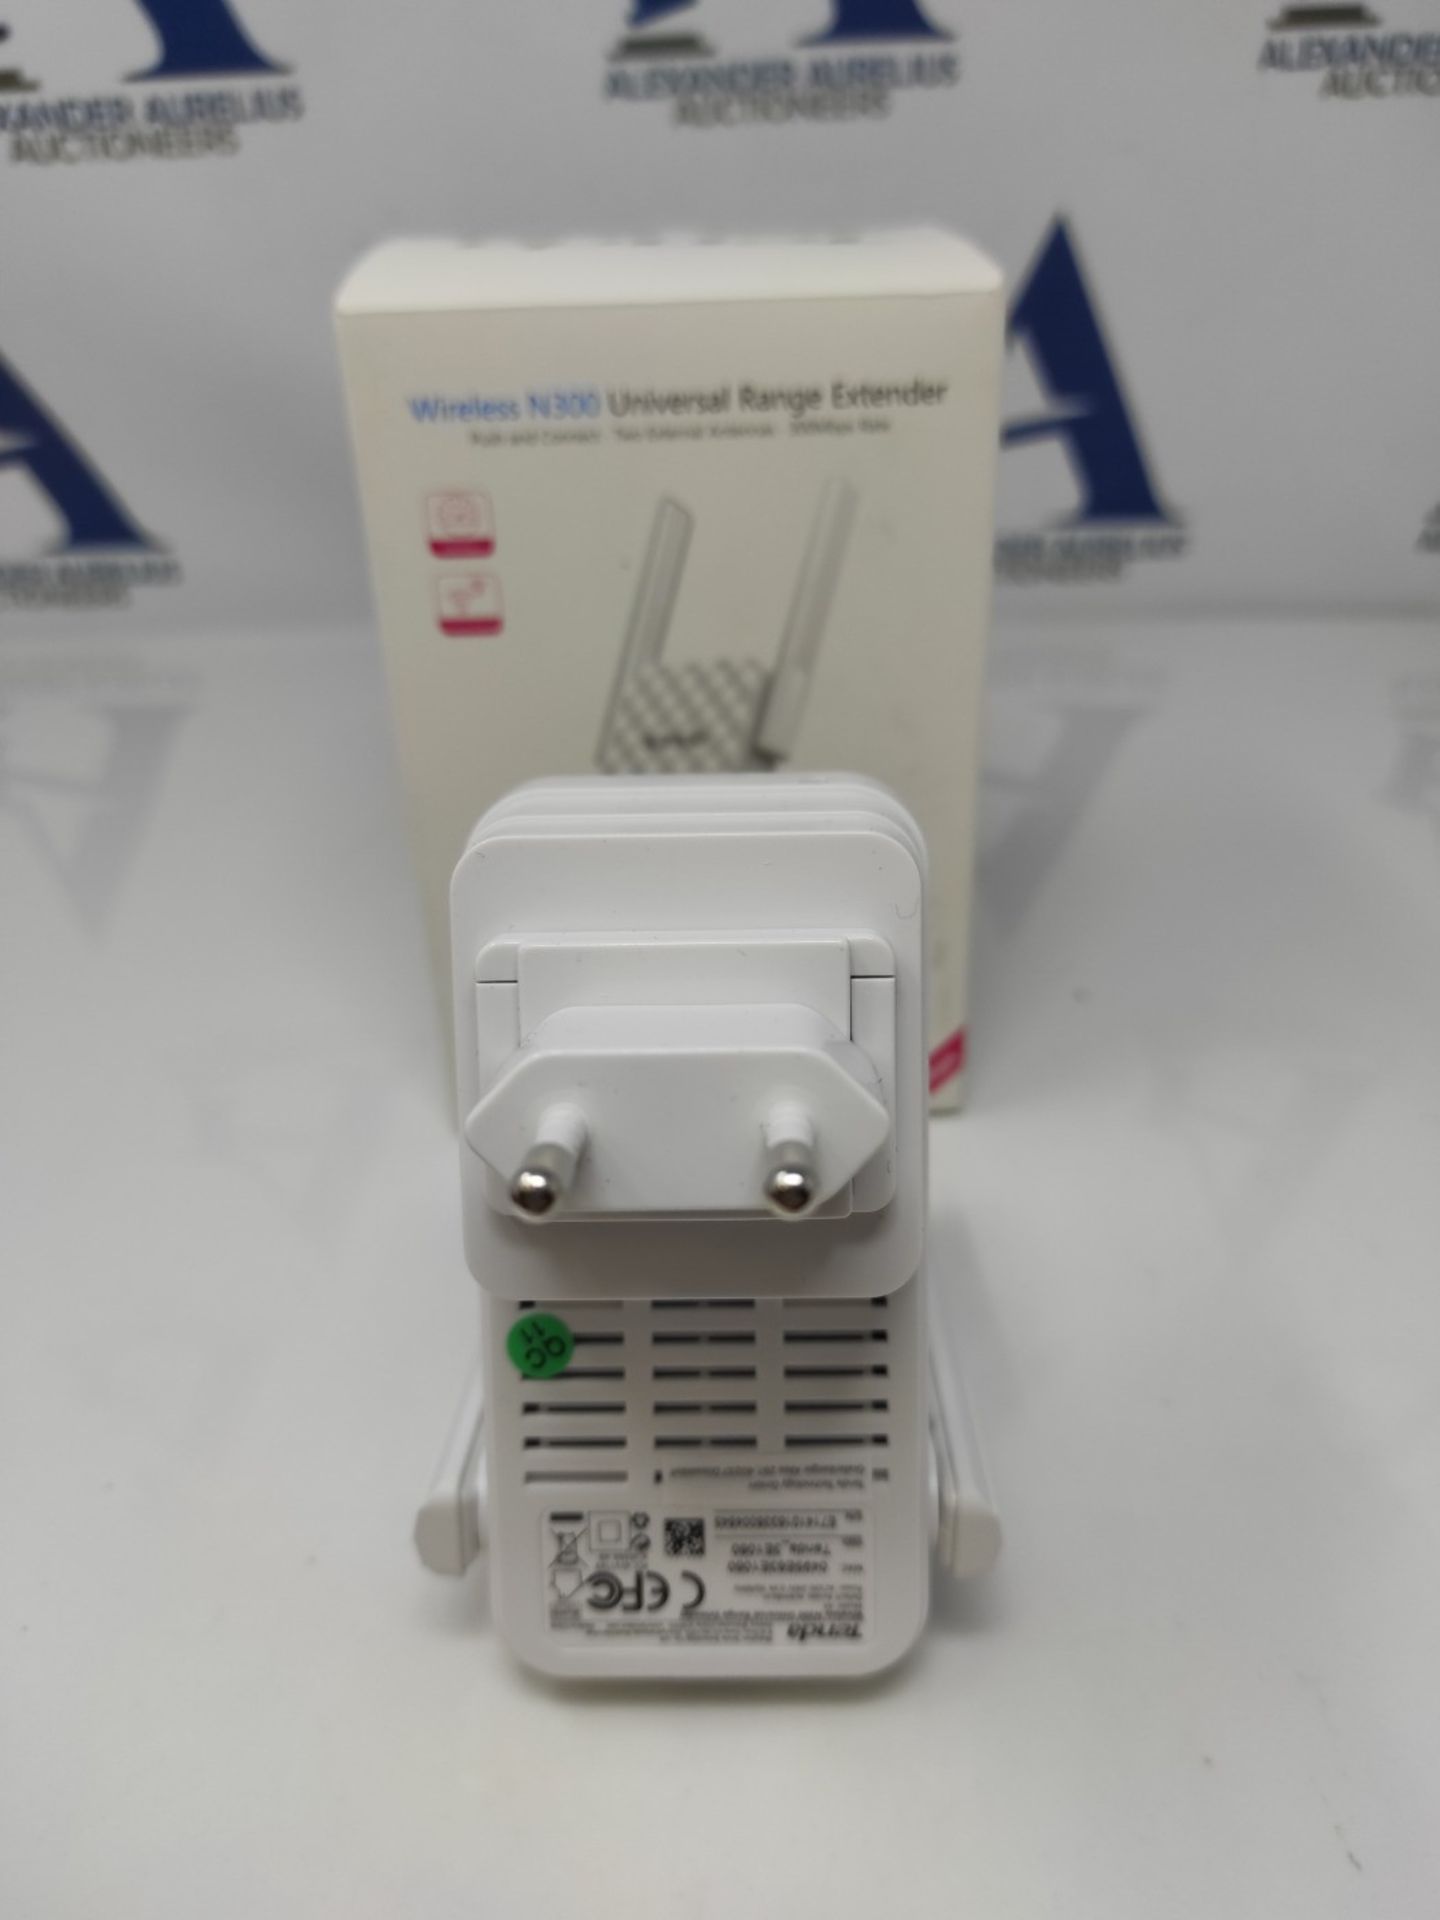 Tenda A9 WiFi Wireless Repeater 300 Mbps, Access Point and Universal Range Extender St - Image 3 of 3